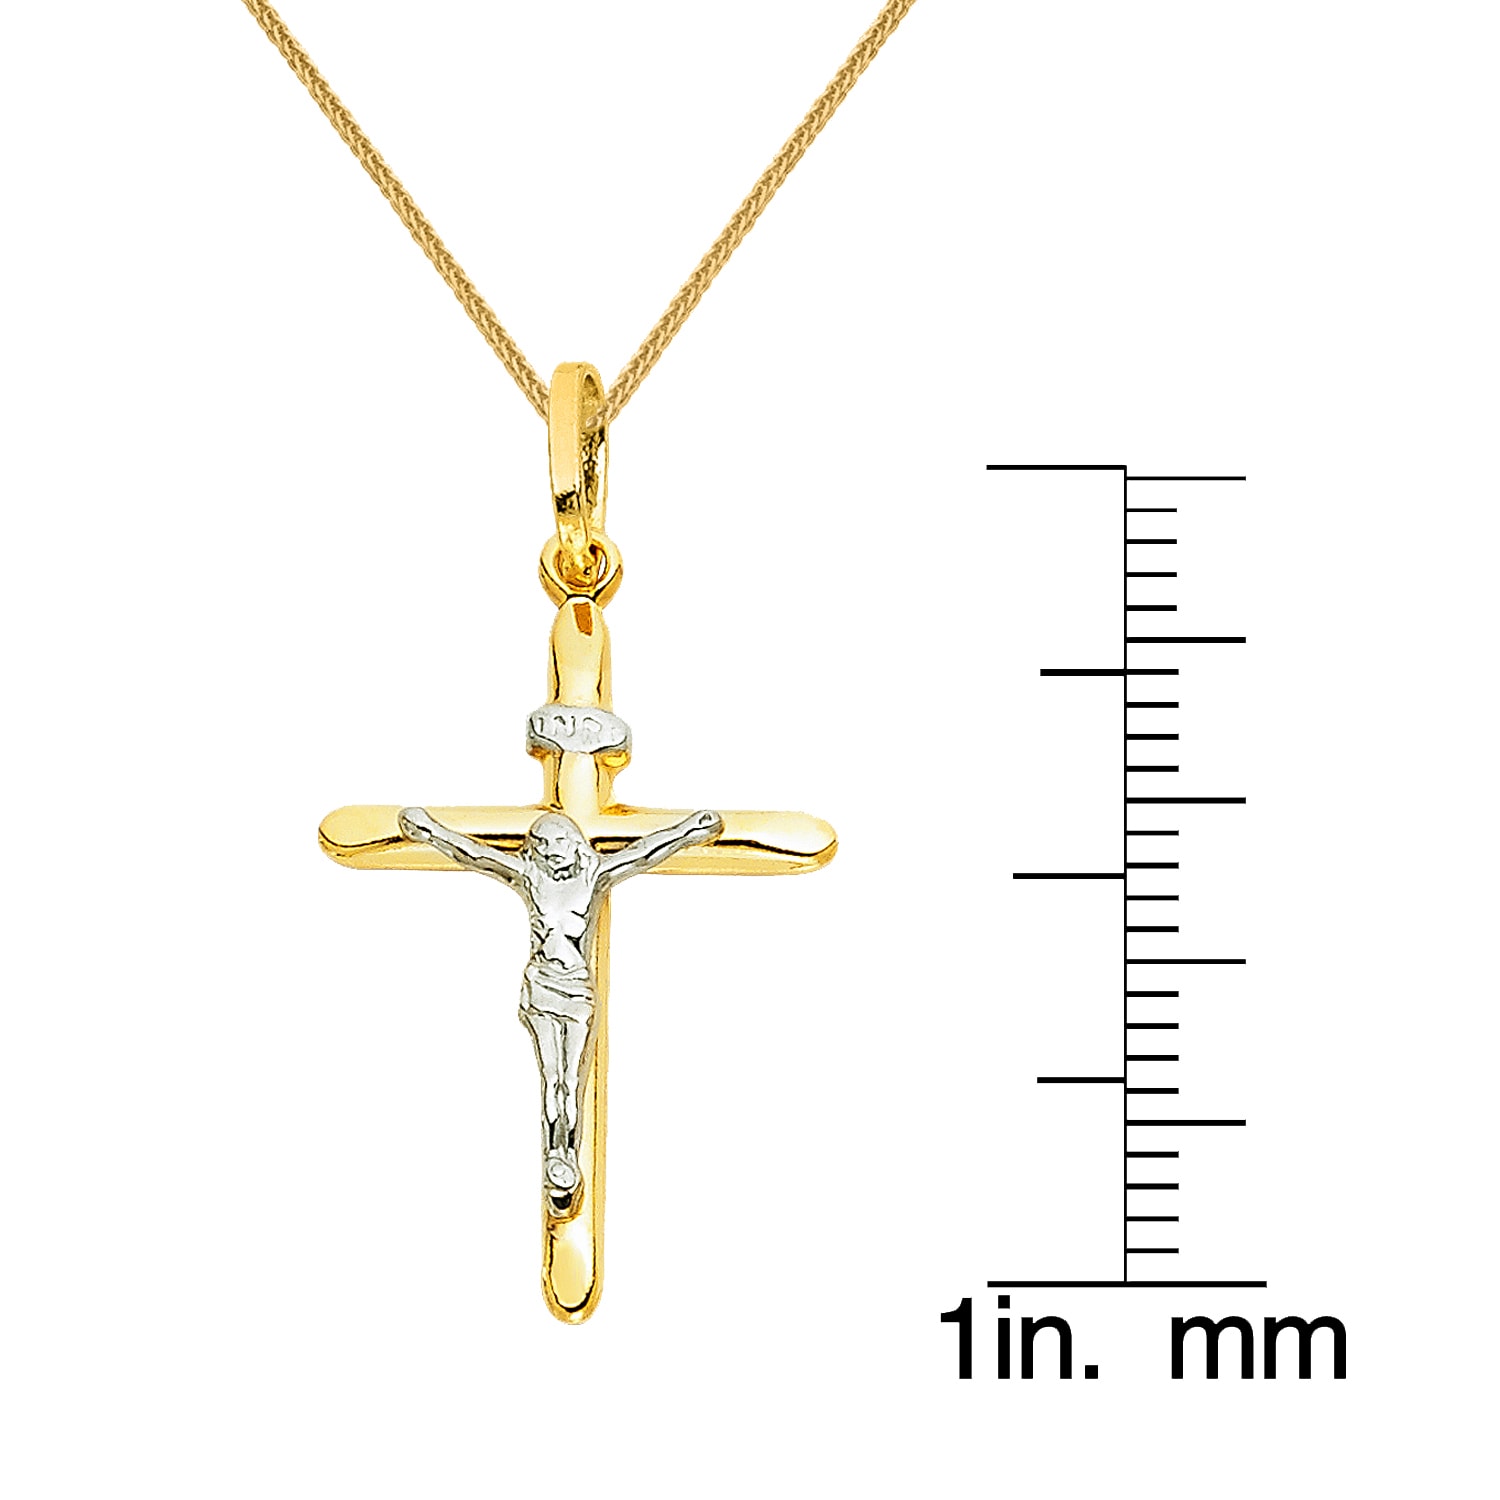 14K Two-Tone Gold Holy Bible with Cross Pendant on an Adjustable Chain Necklace 